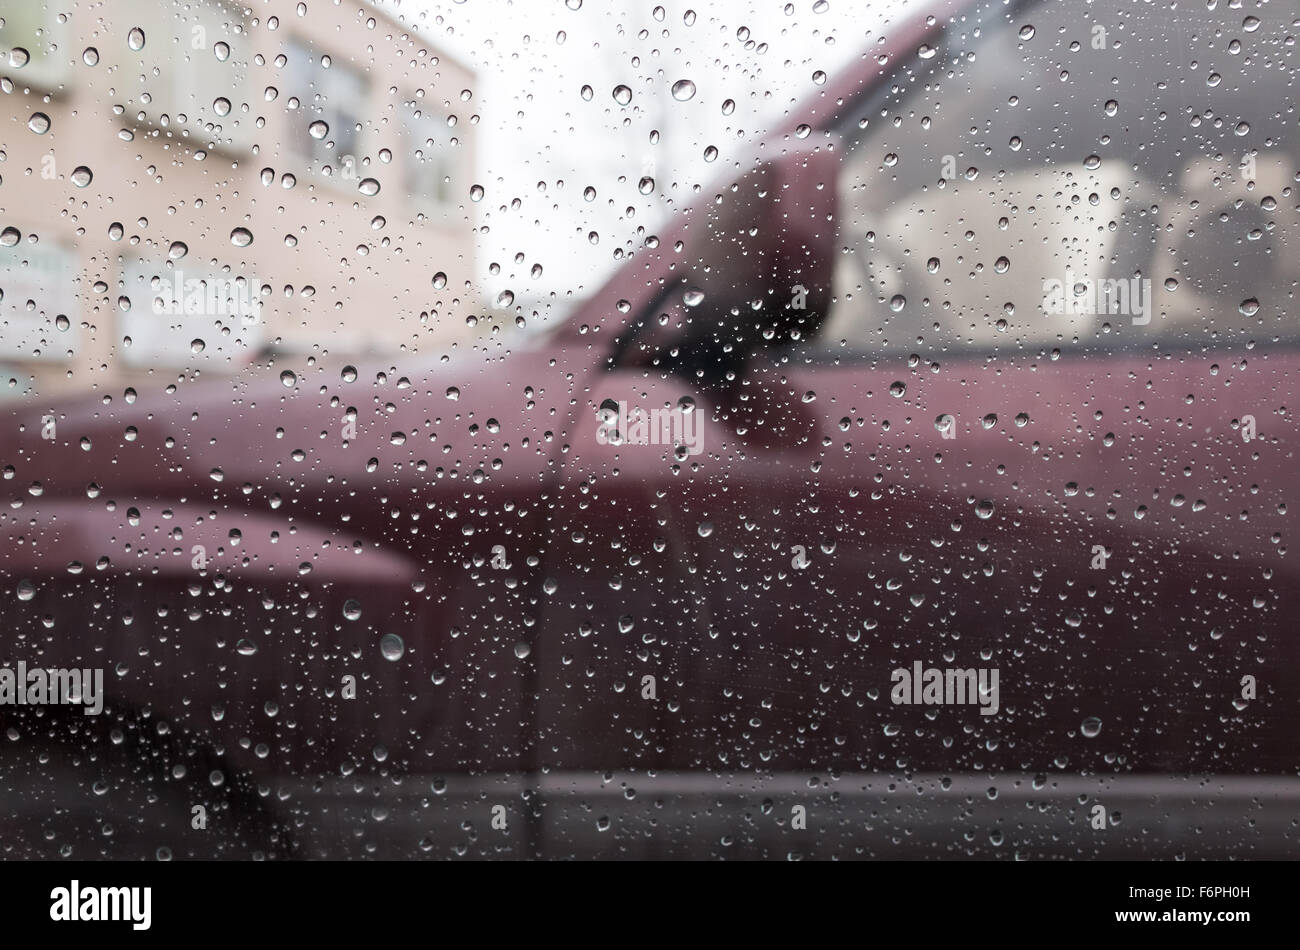 Wet car window with raindrops and a blurred car behind. Closeup photo with selective focus and shallow DOF Stock Photo